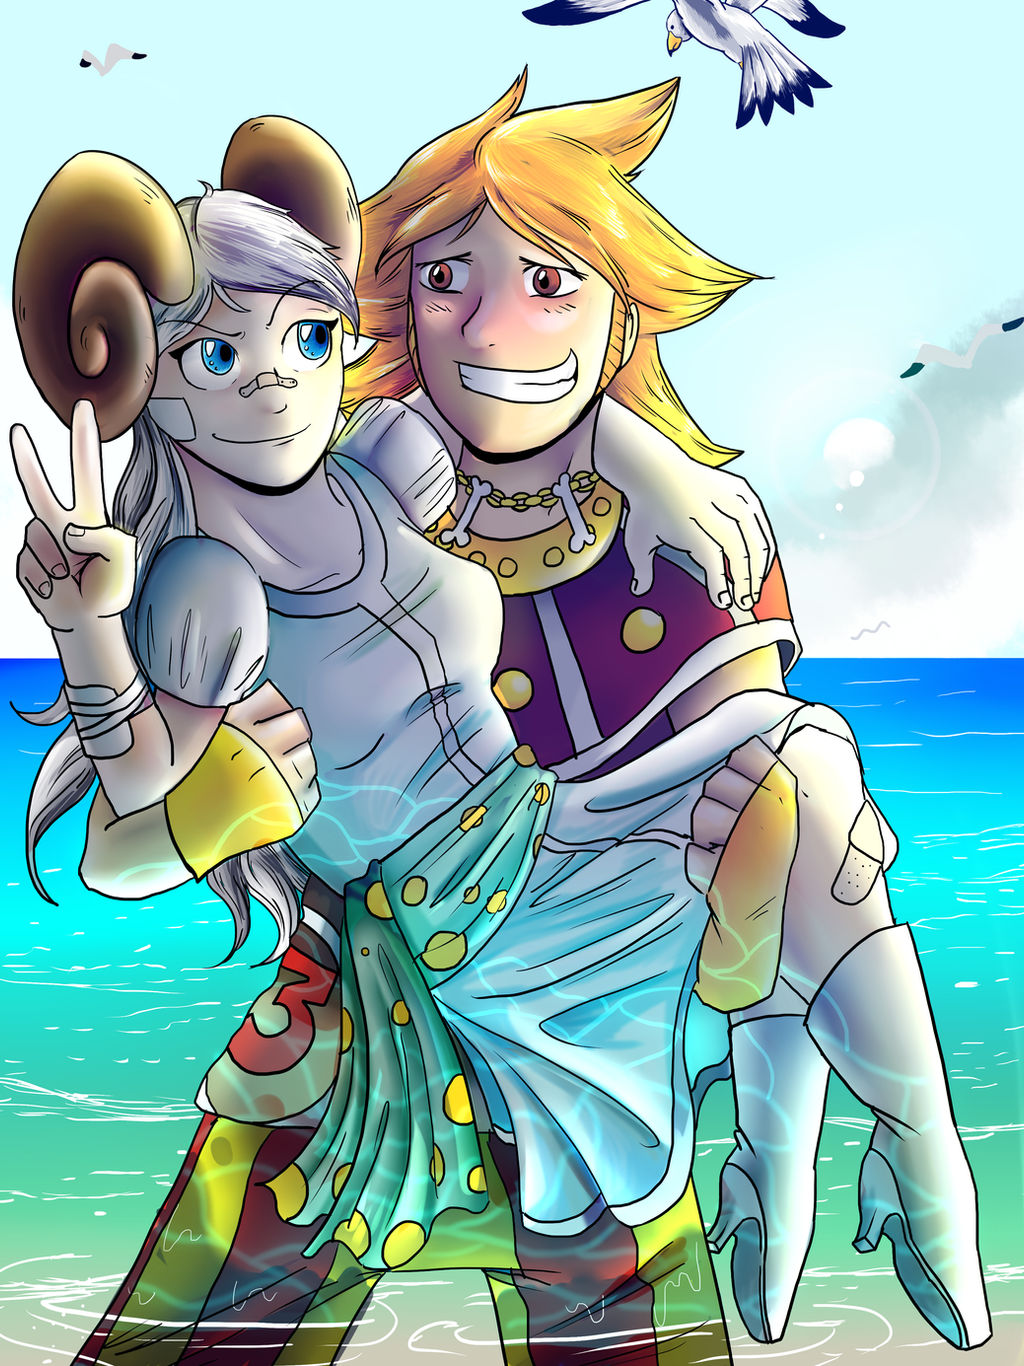 Going Merry x Thousand Sunny RP by kirbyfan432 on DeviantArt